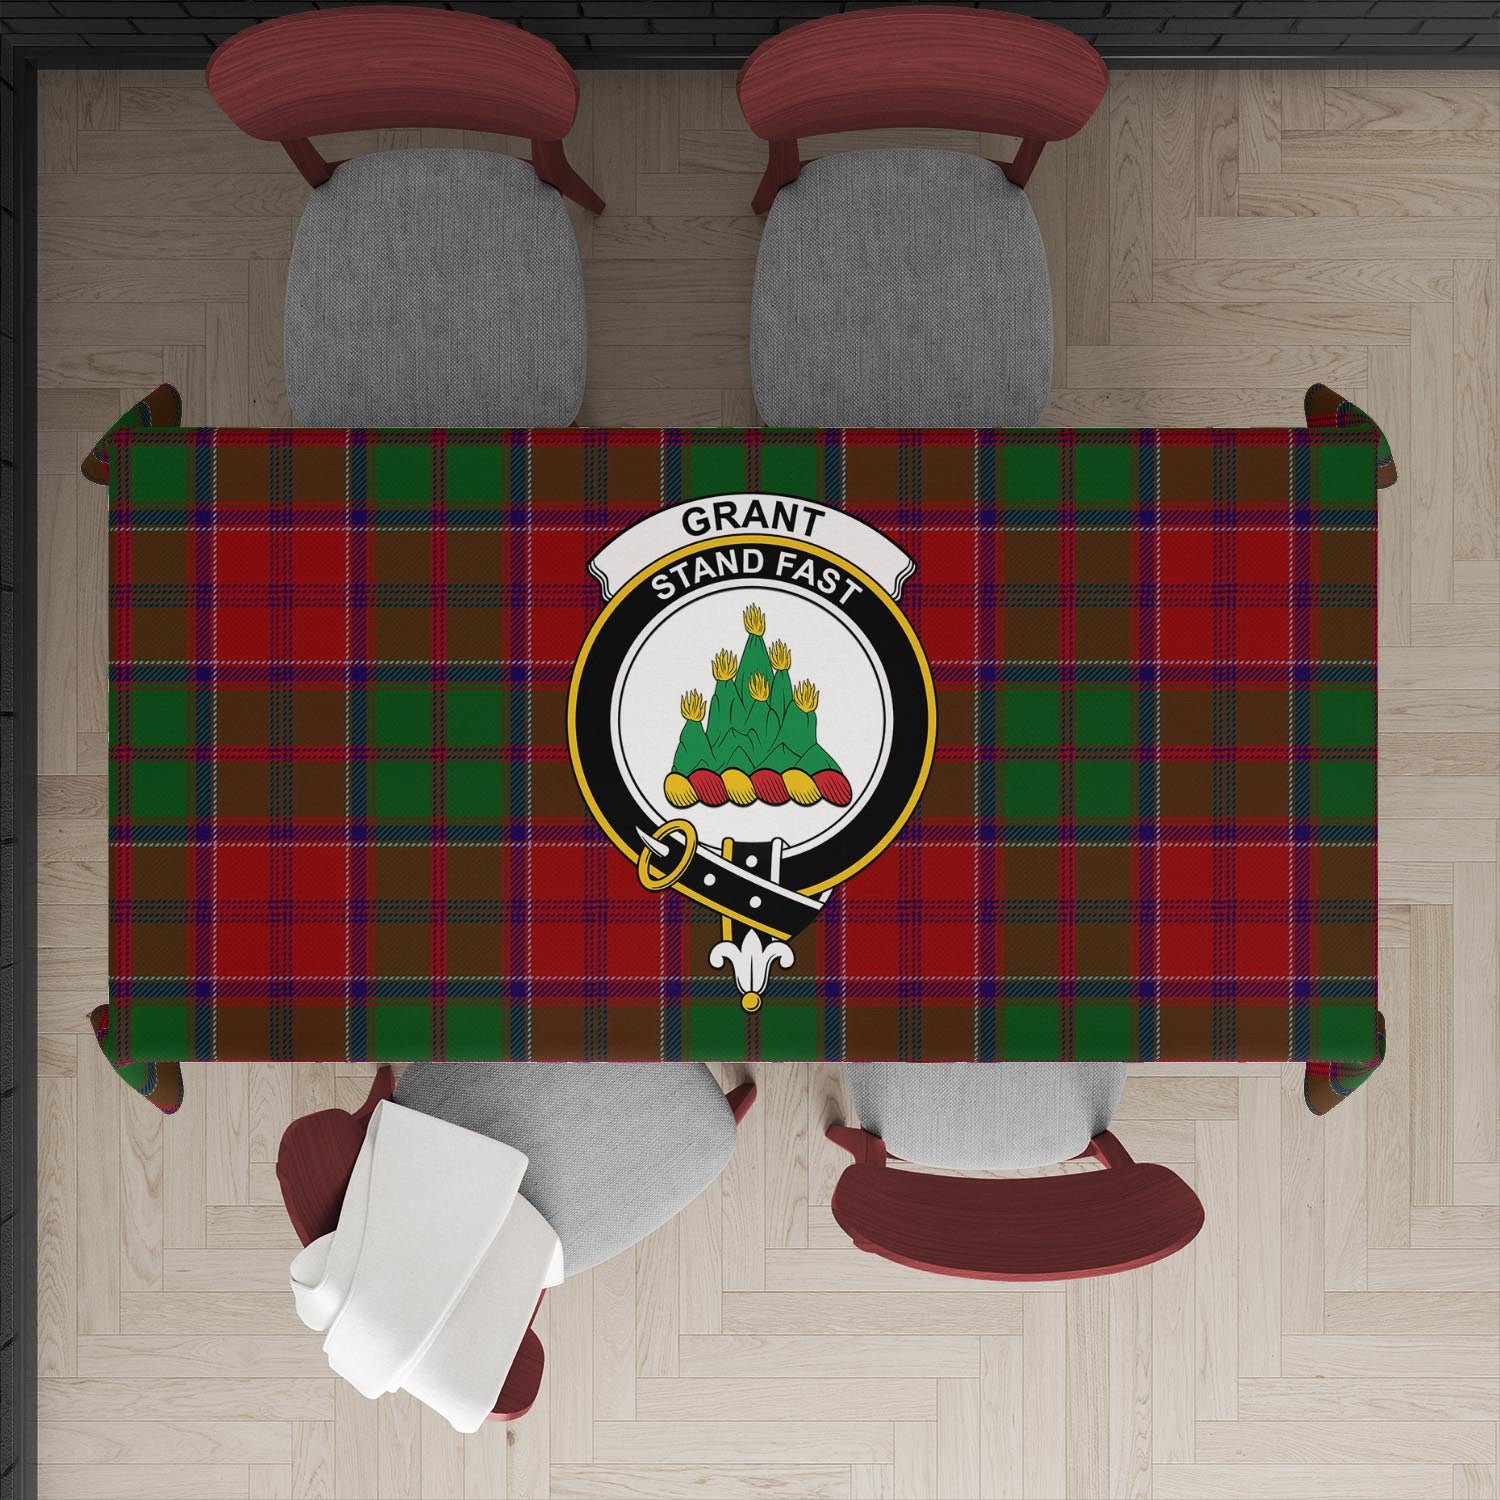 grant-tatan-tablecloth-with-family-crest